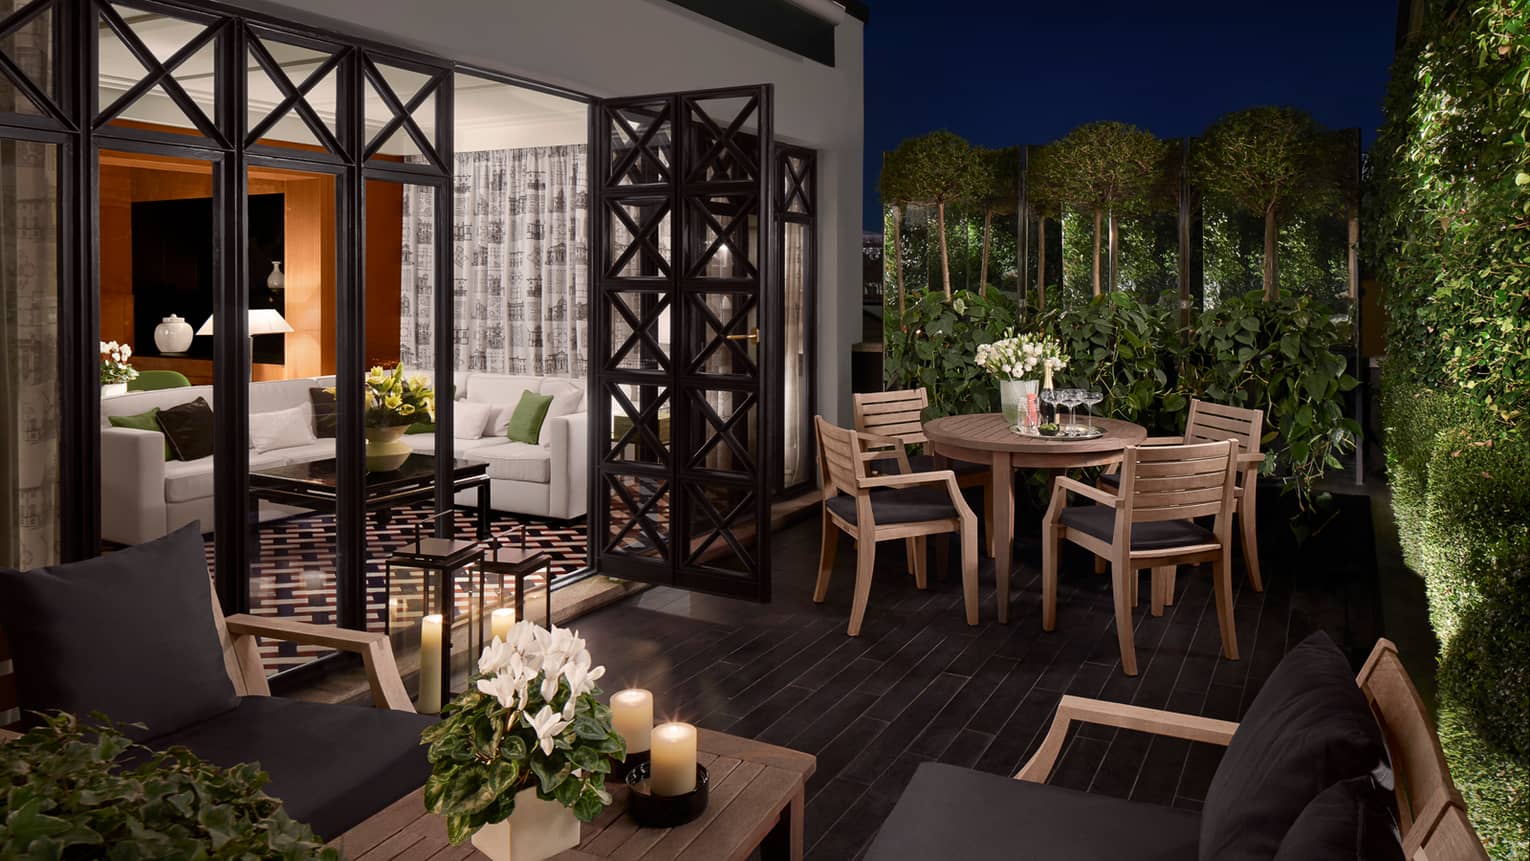 Balcony with wood tables and candles, chairs with black cushions, open doors to suite, white sofa